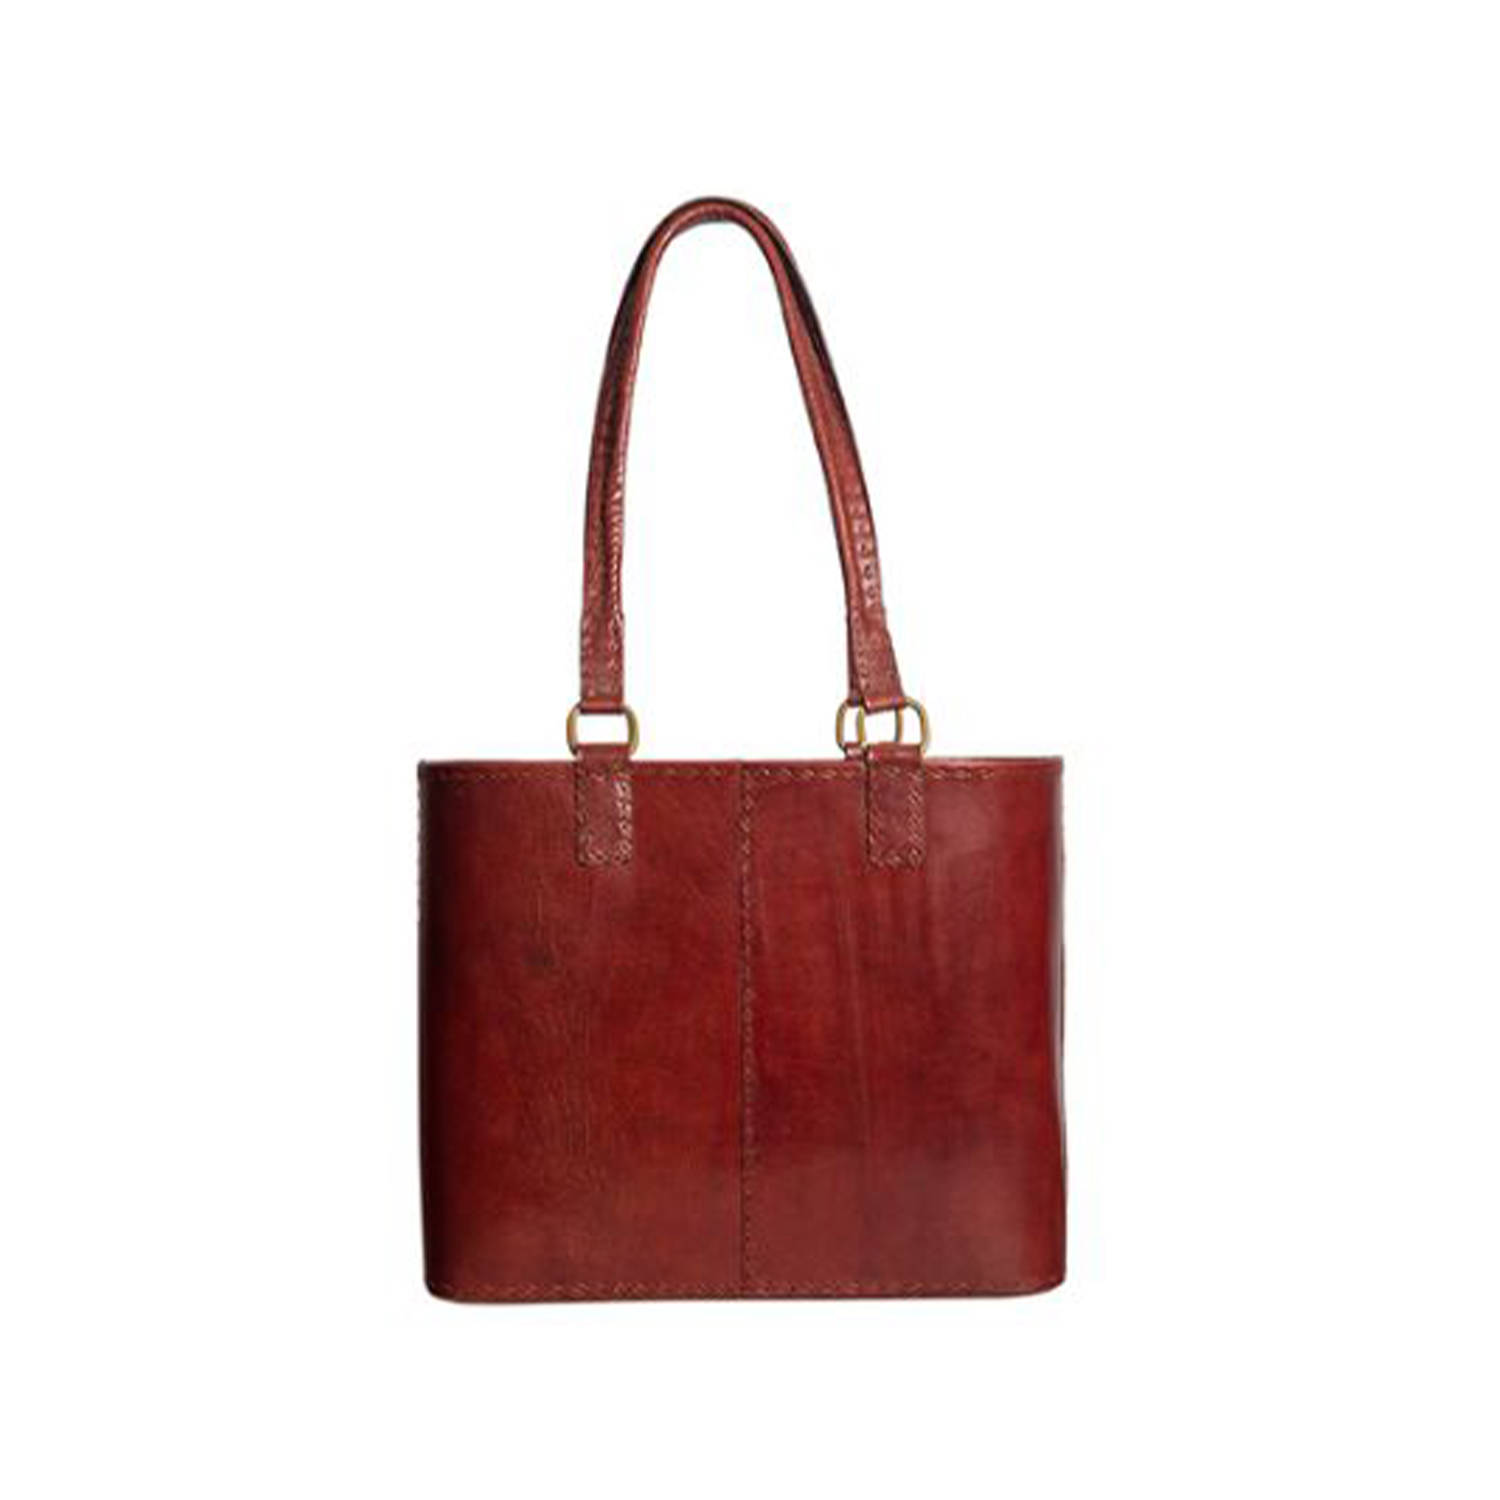 Buy Leather Duffle Bags And Travel Bags Online In India | MaheTri